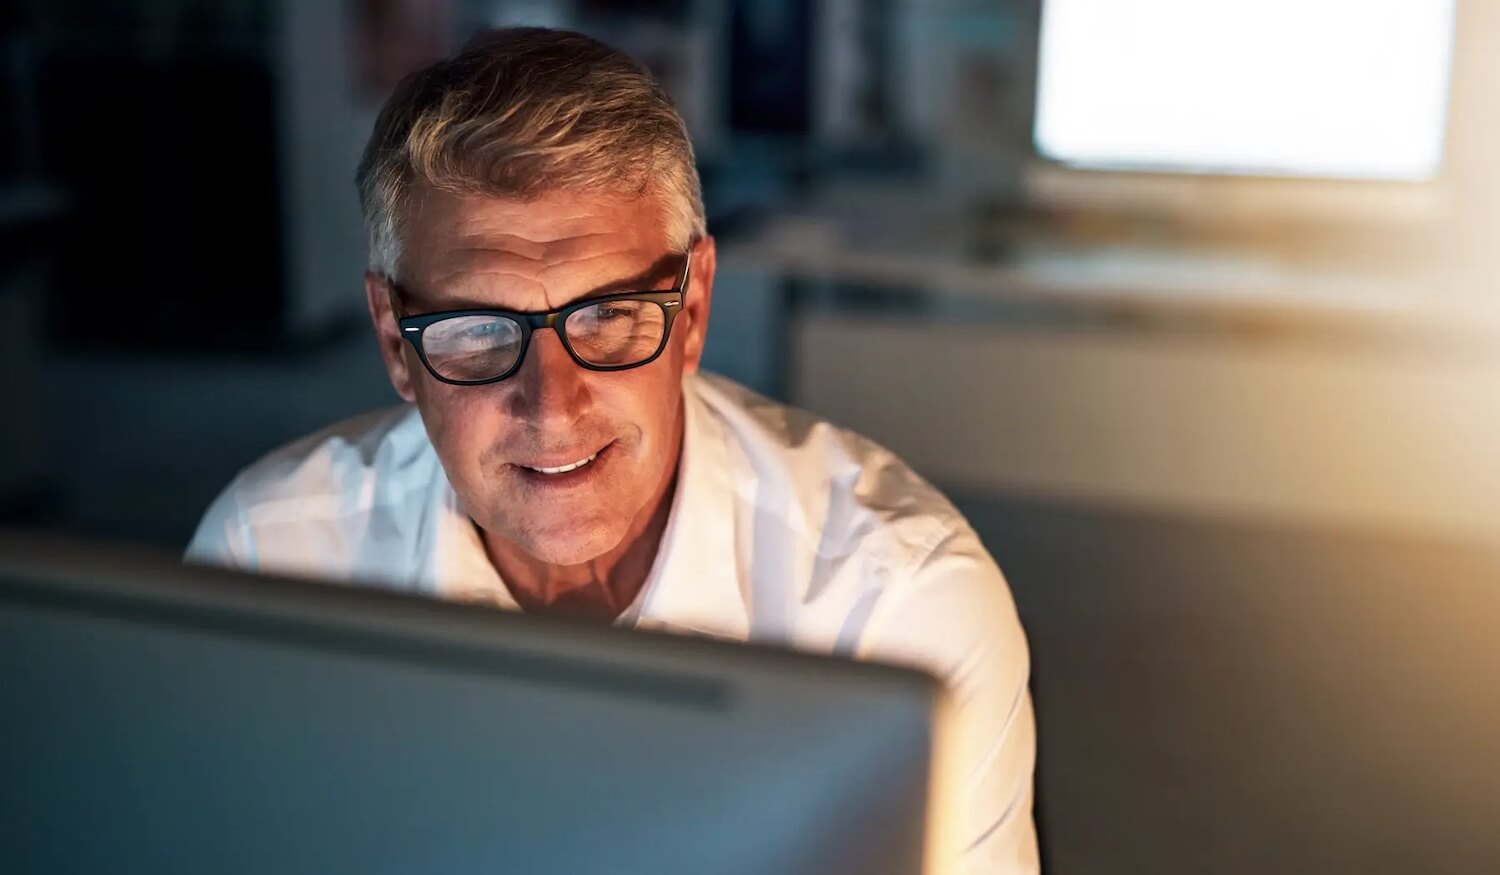 IT professional sitting at computer at night smiling at screen with secure email